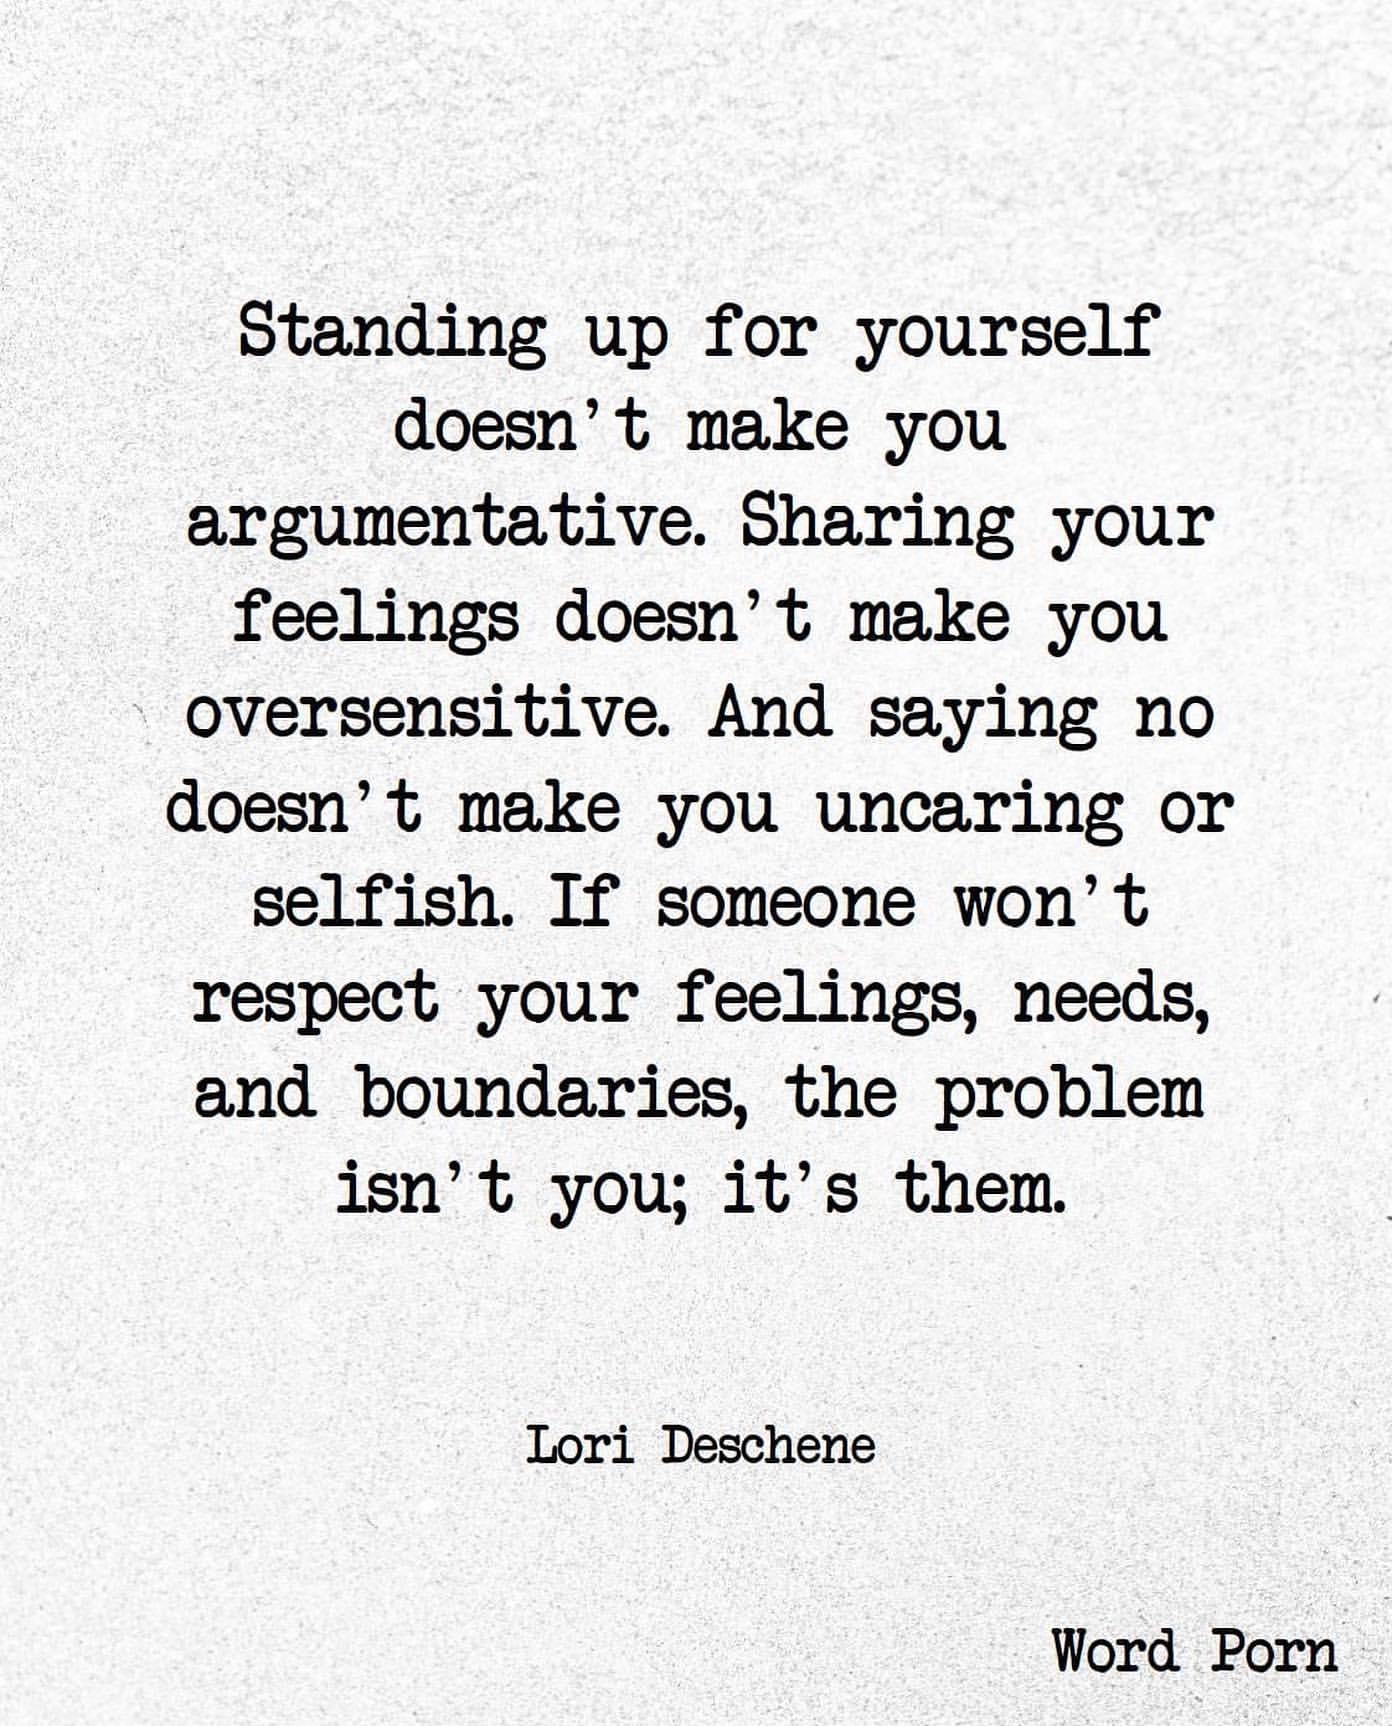 Standing up for yourself doesn't make you argumentative. Sharing your feelings doesn't make you oversensitive. And saying no doesn't make you uncaring or selfish. If someone won' t respect your feelings, needs, and boundaries, the problem isn't you; it's them. Lori Deschene.